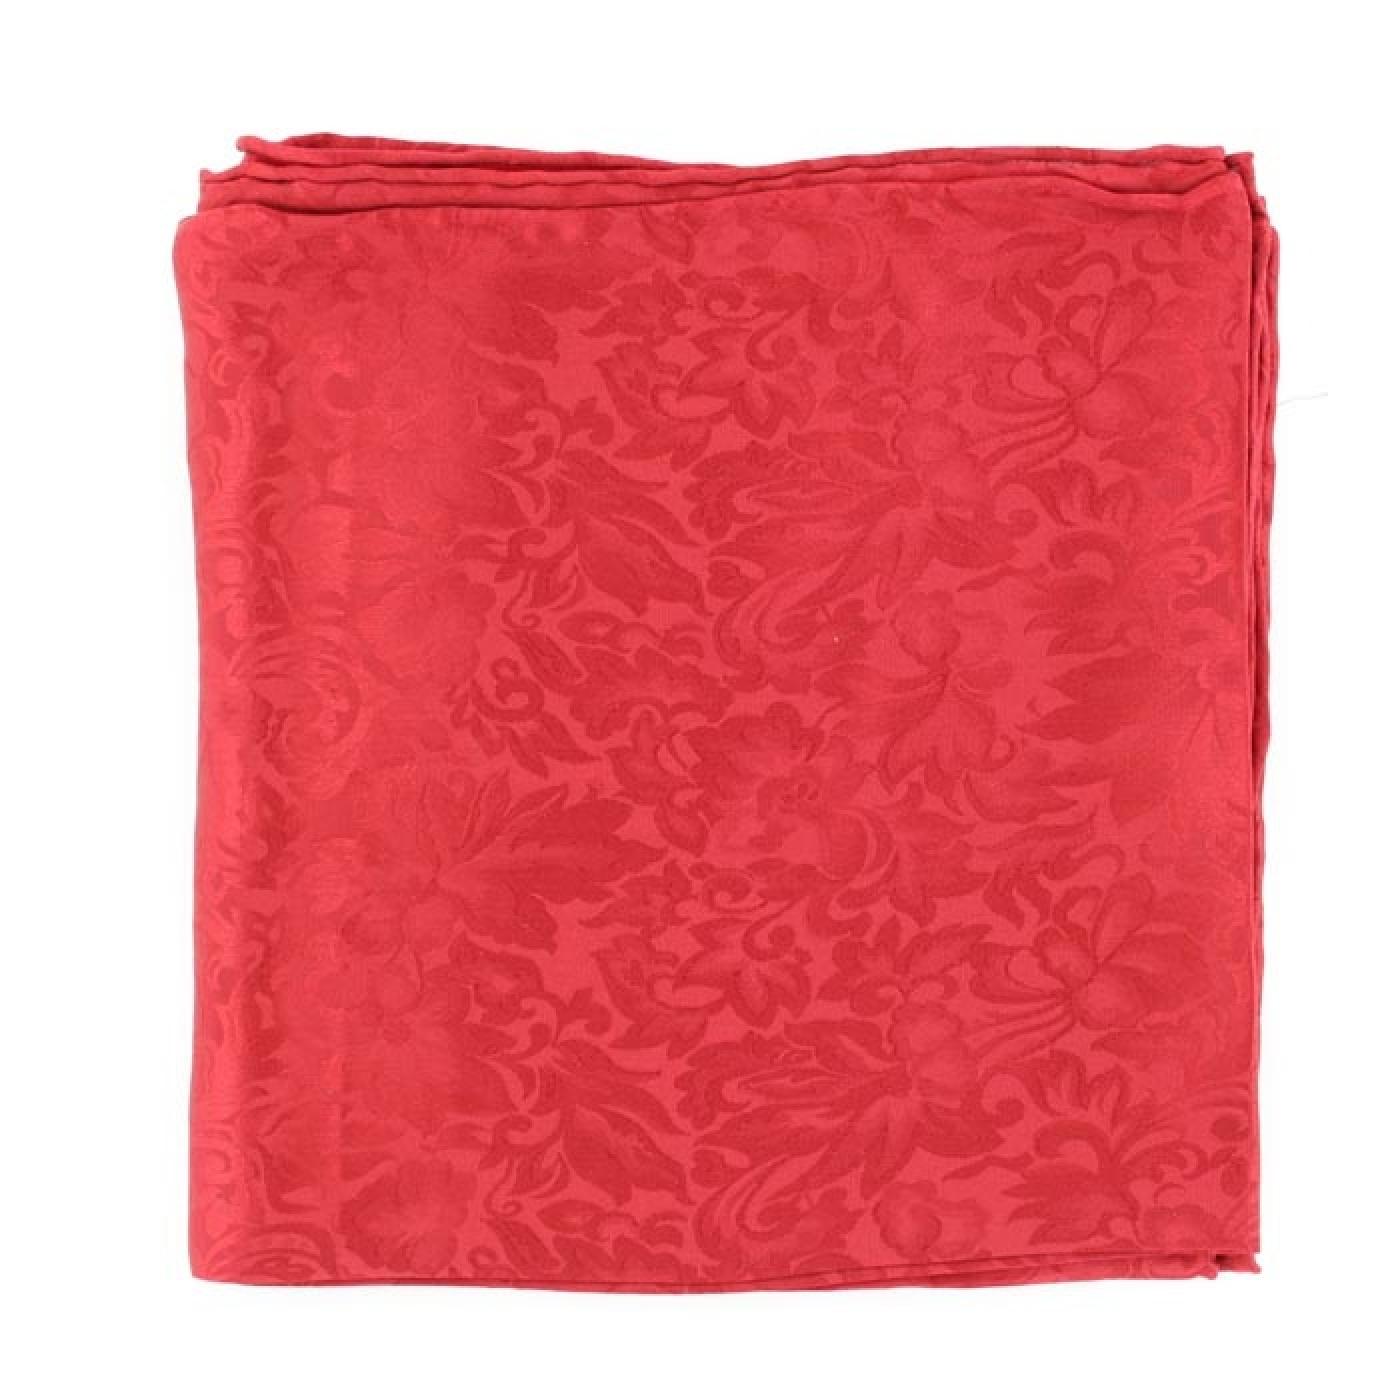 M&F Western Products Jacquard Rags Red